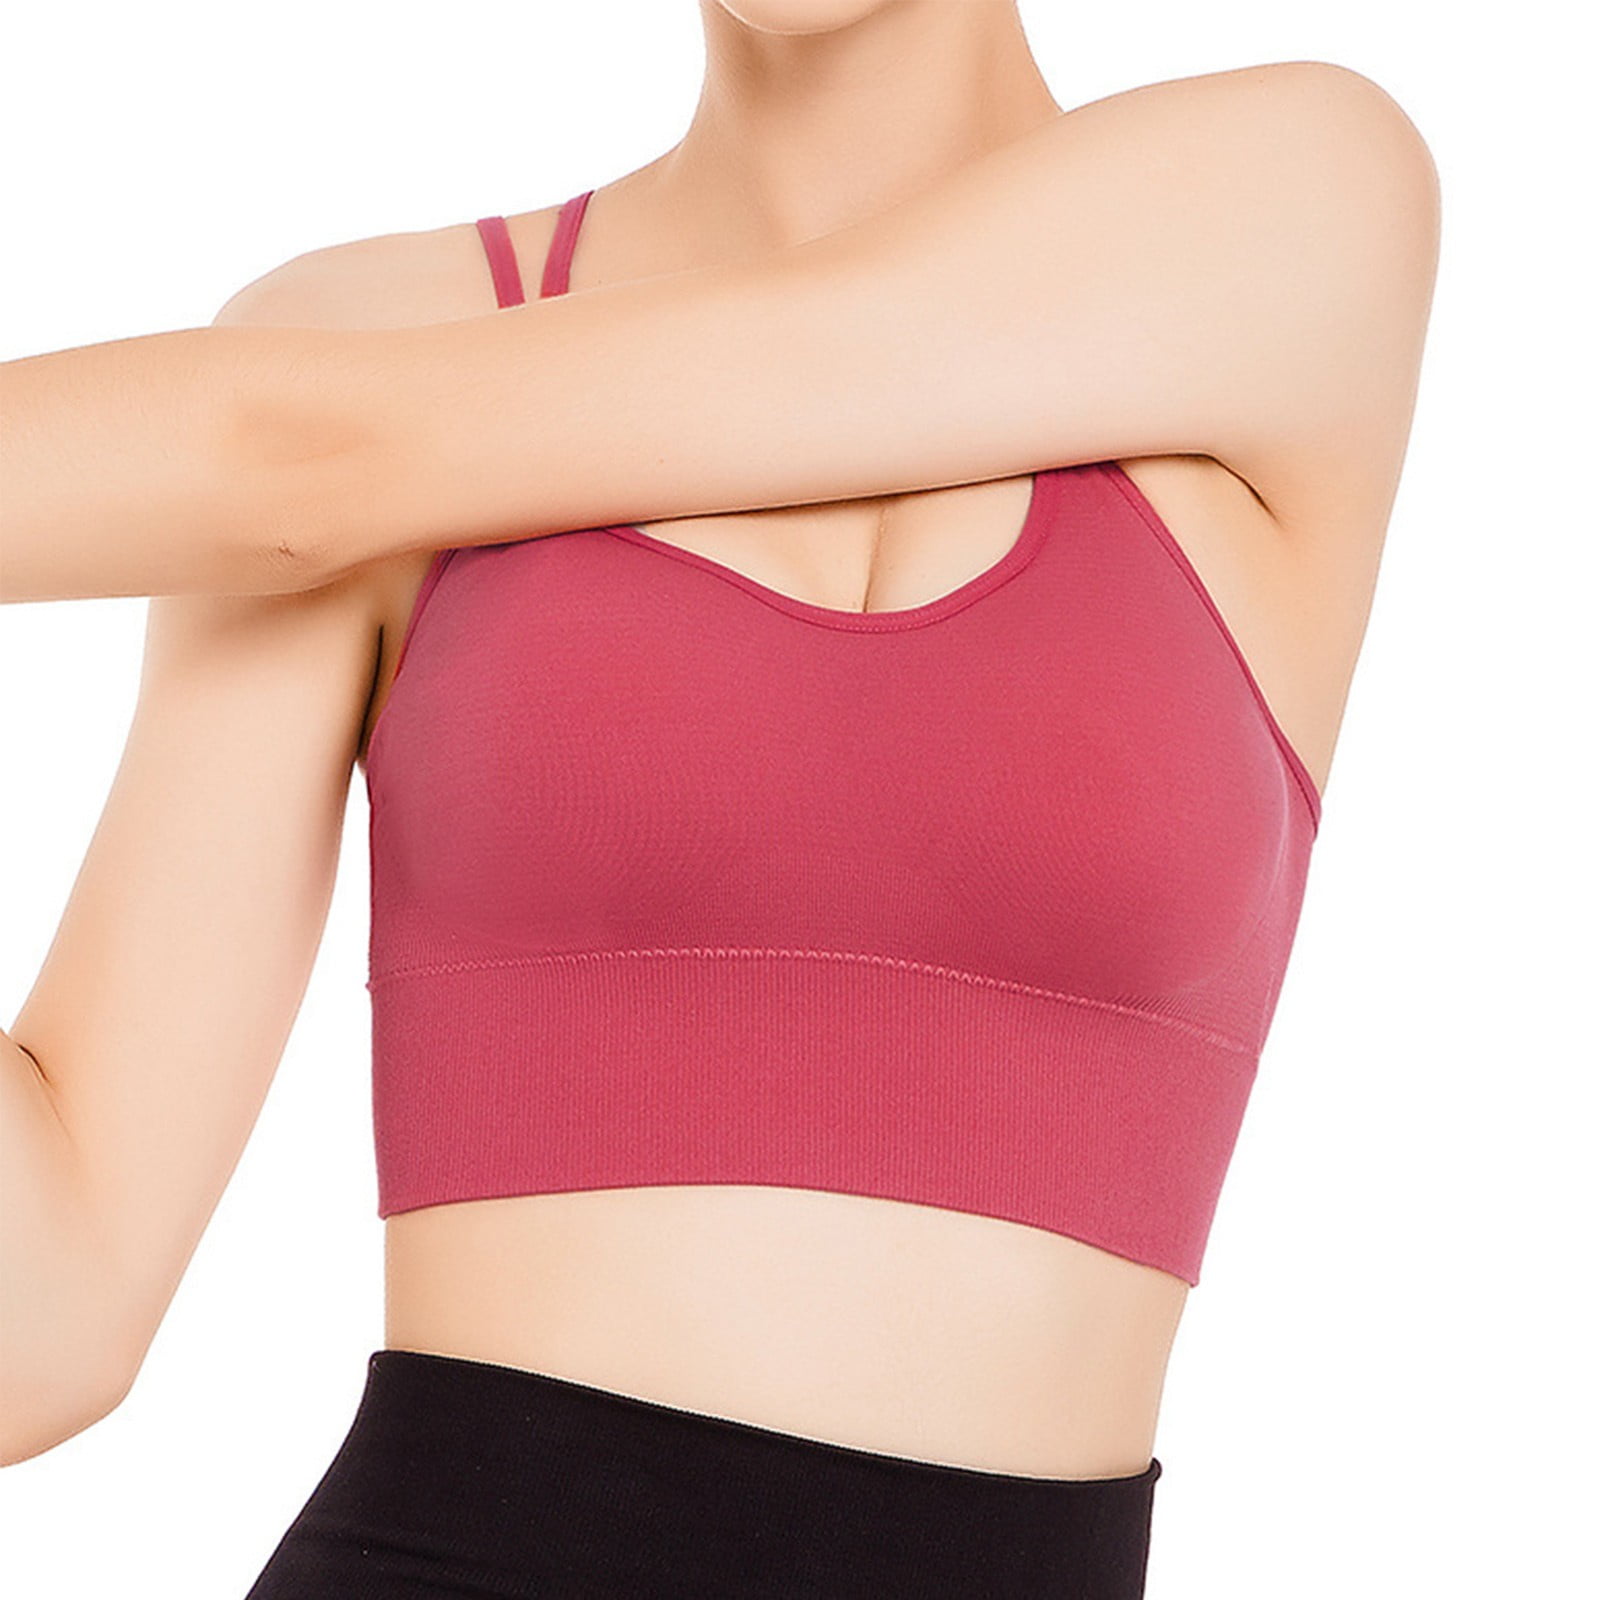 CAICJ98 Lingerie for Women Yoga Tank Tops for Women Built in Shelf Bra B/C  Cups Strappy Back Activewear Workout Compression Tops Watermelon Red,S 